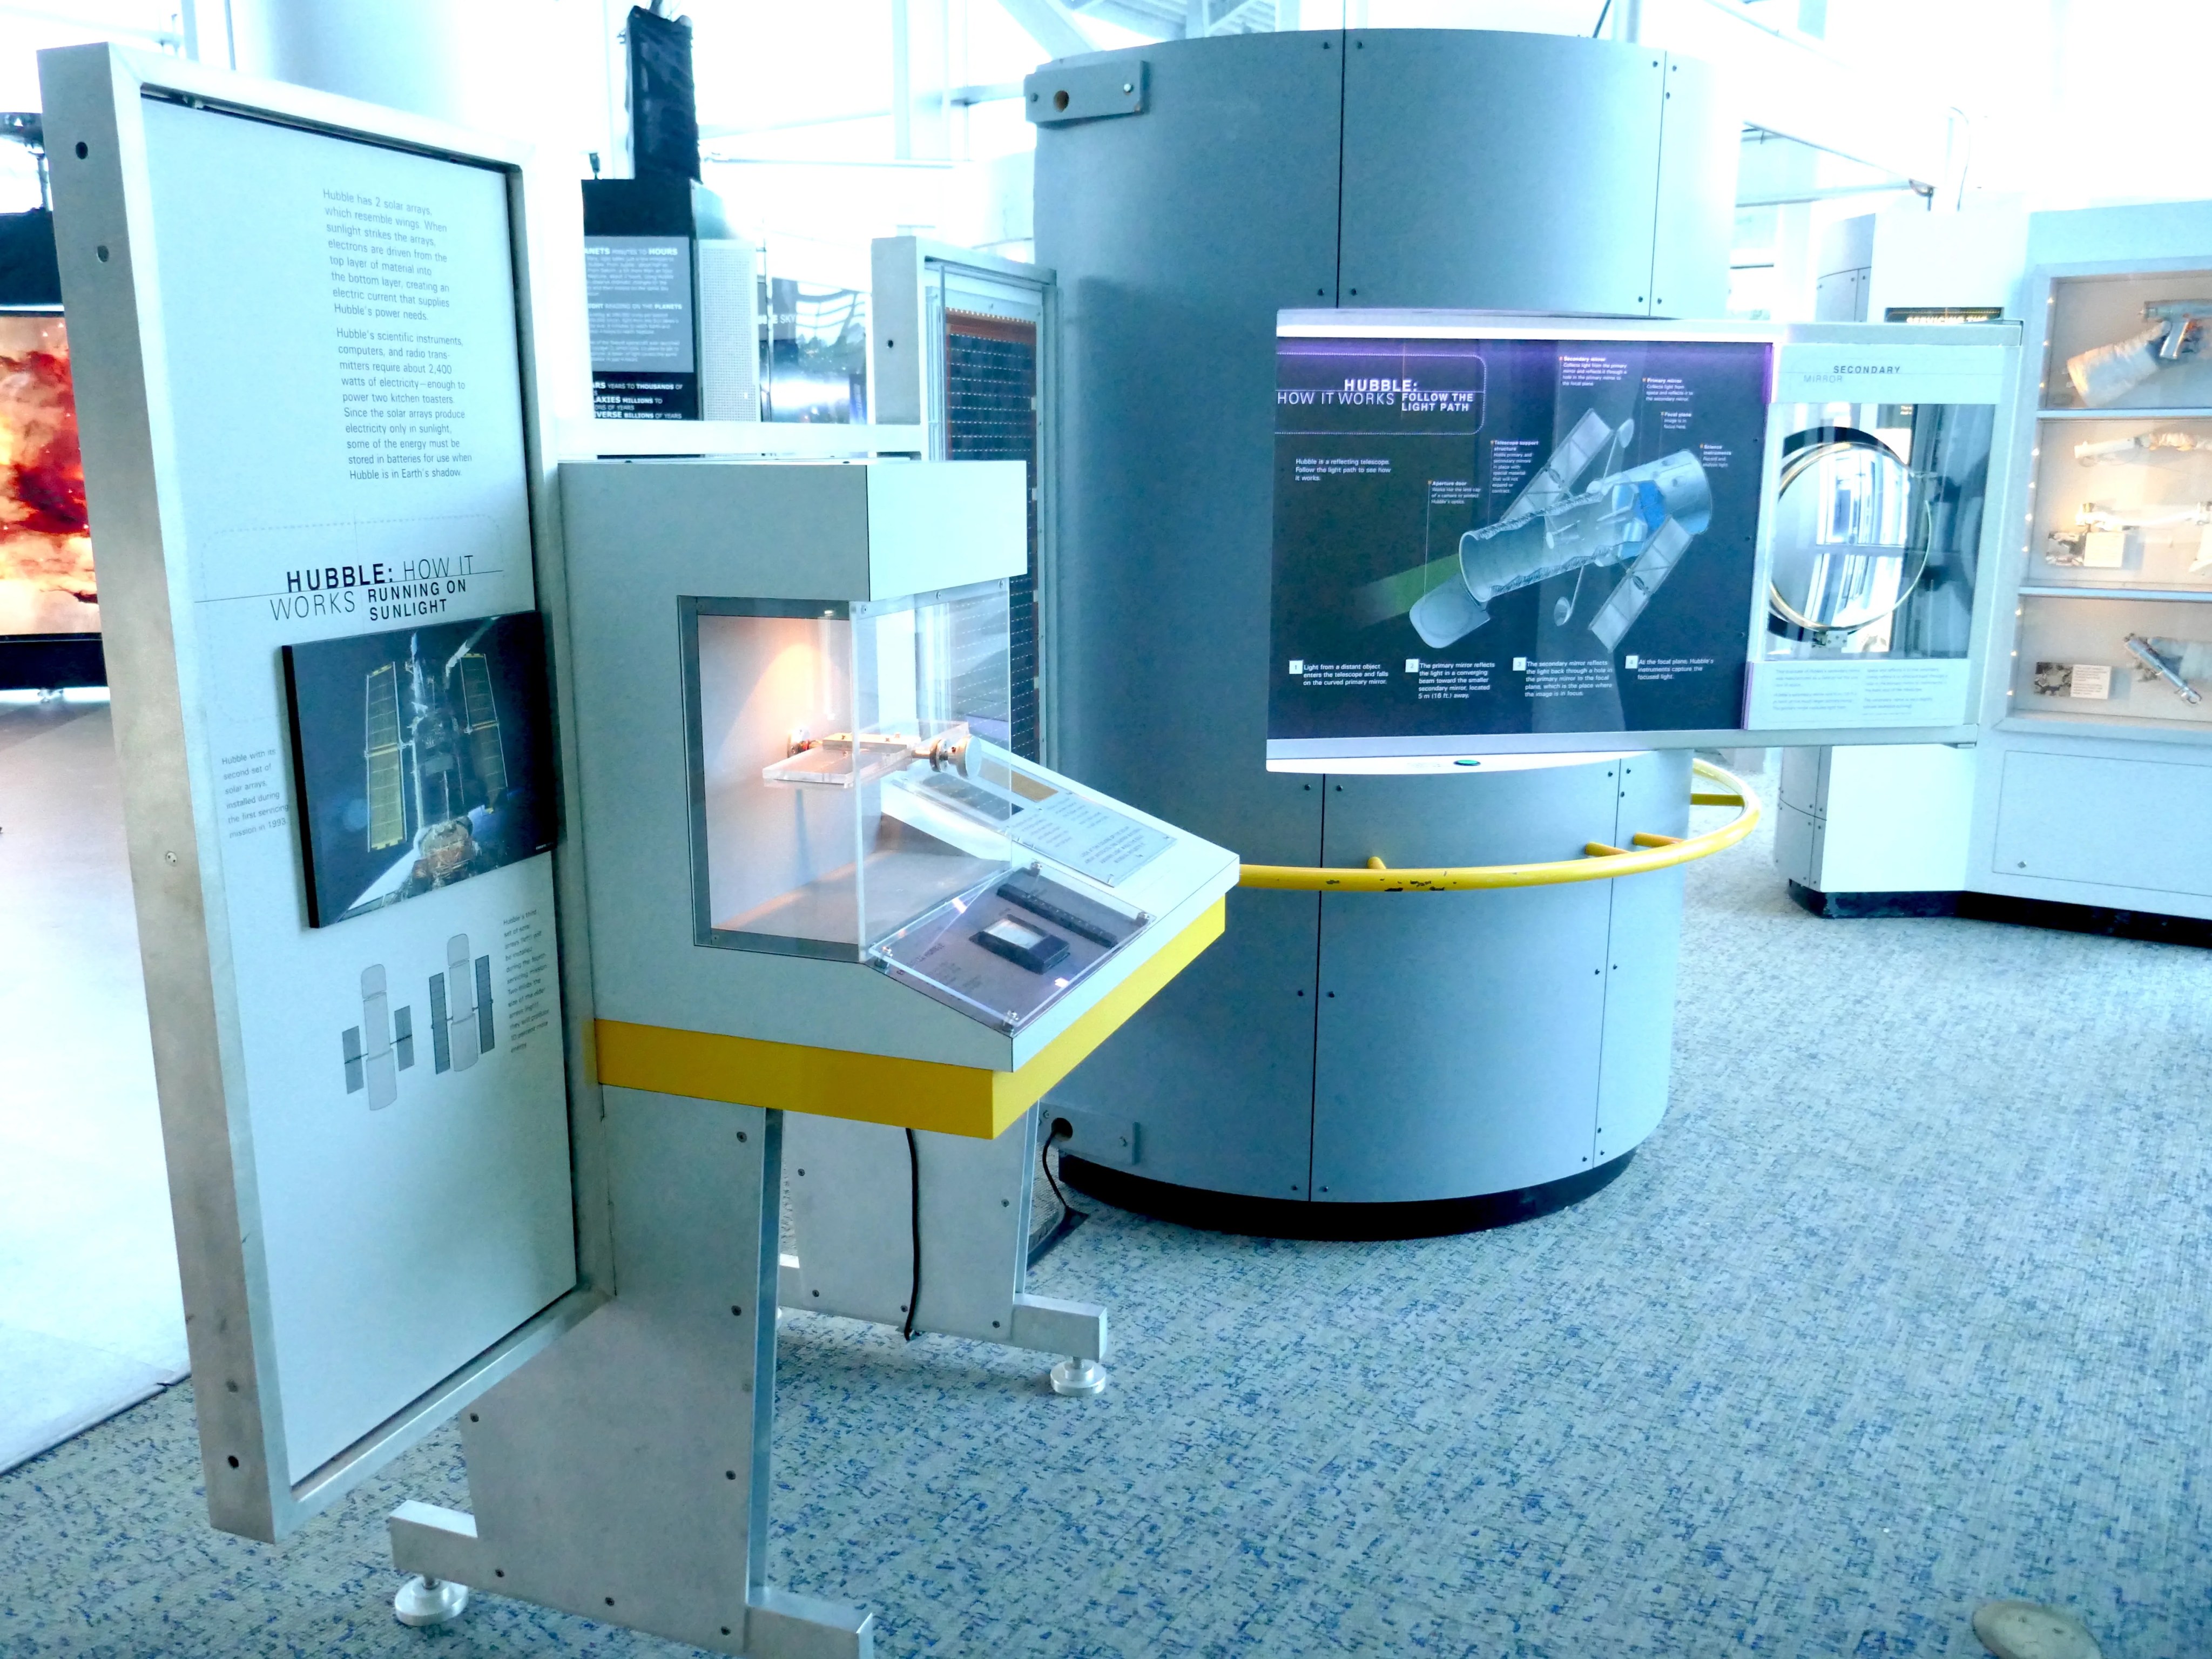 A section of the Hubble traveling exhibit that discusses how the telescope works and how it is powered.